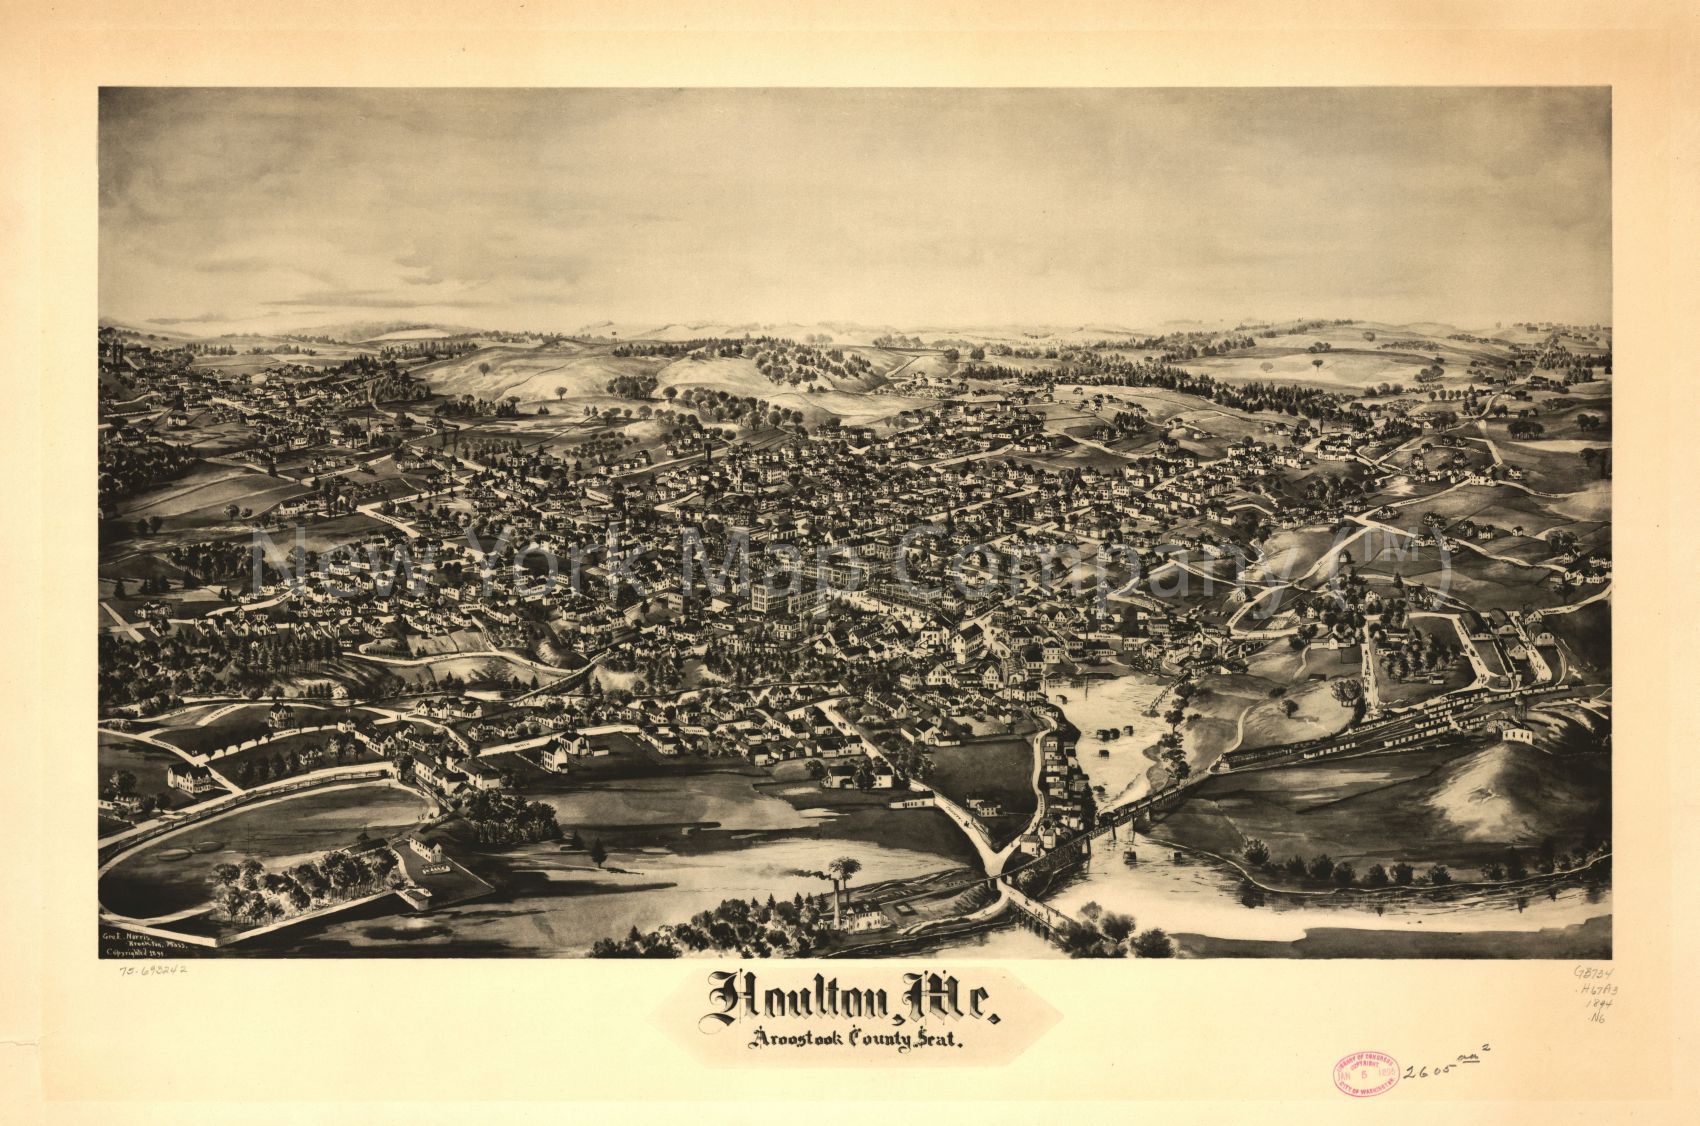 1894 map Houlton, Me. Aroostook County seat. Map Subjects: Houlton | Houlton Me | Maine |